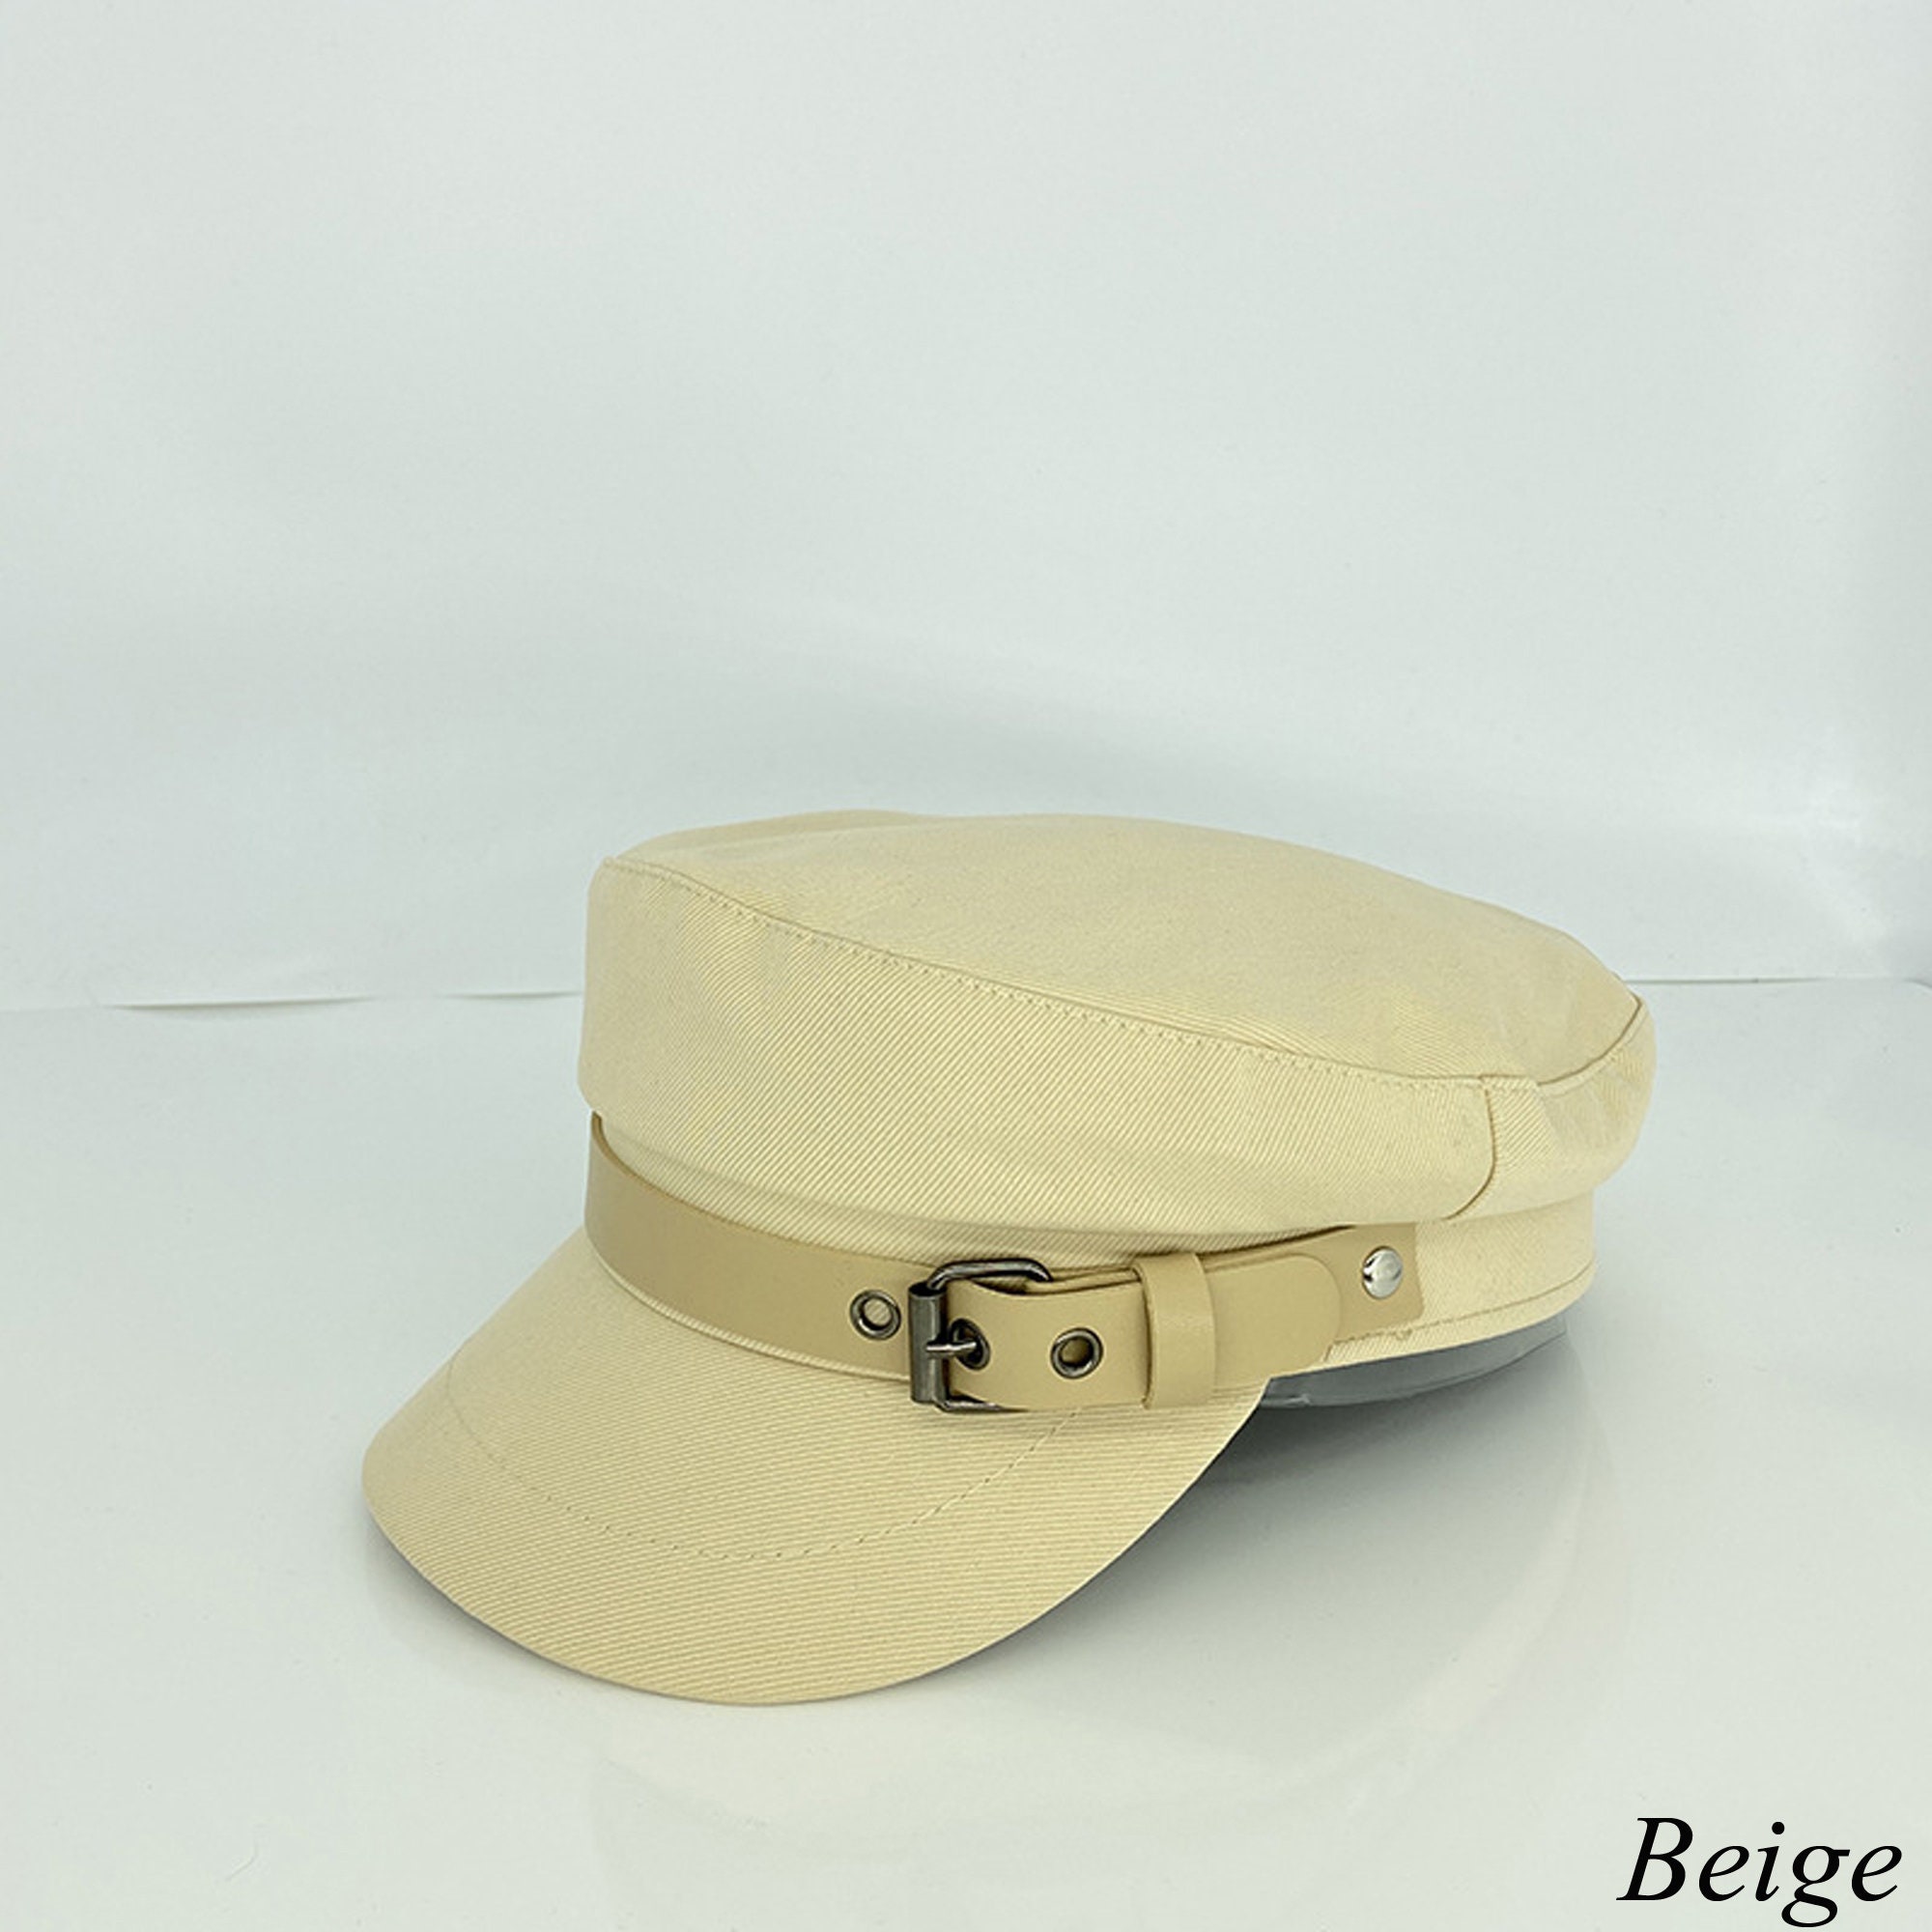 Vintage Military Flat Caps, Unisex Camper Caps, Army Style Cotton